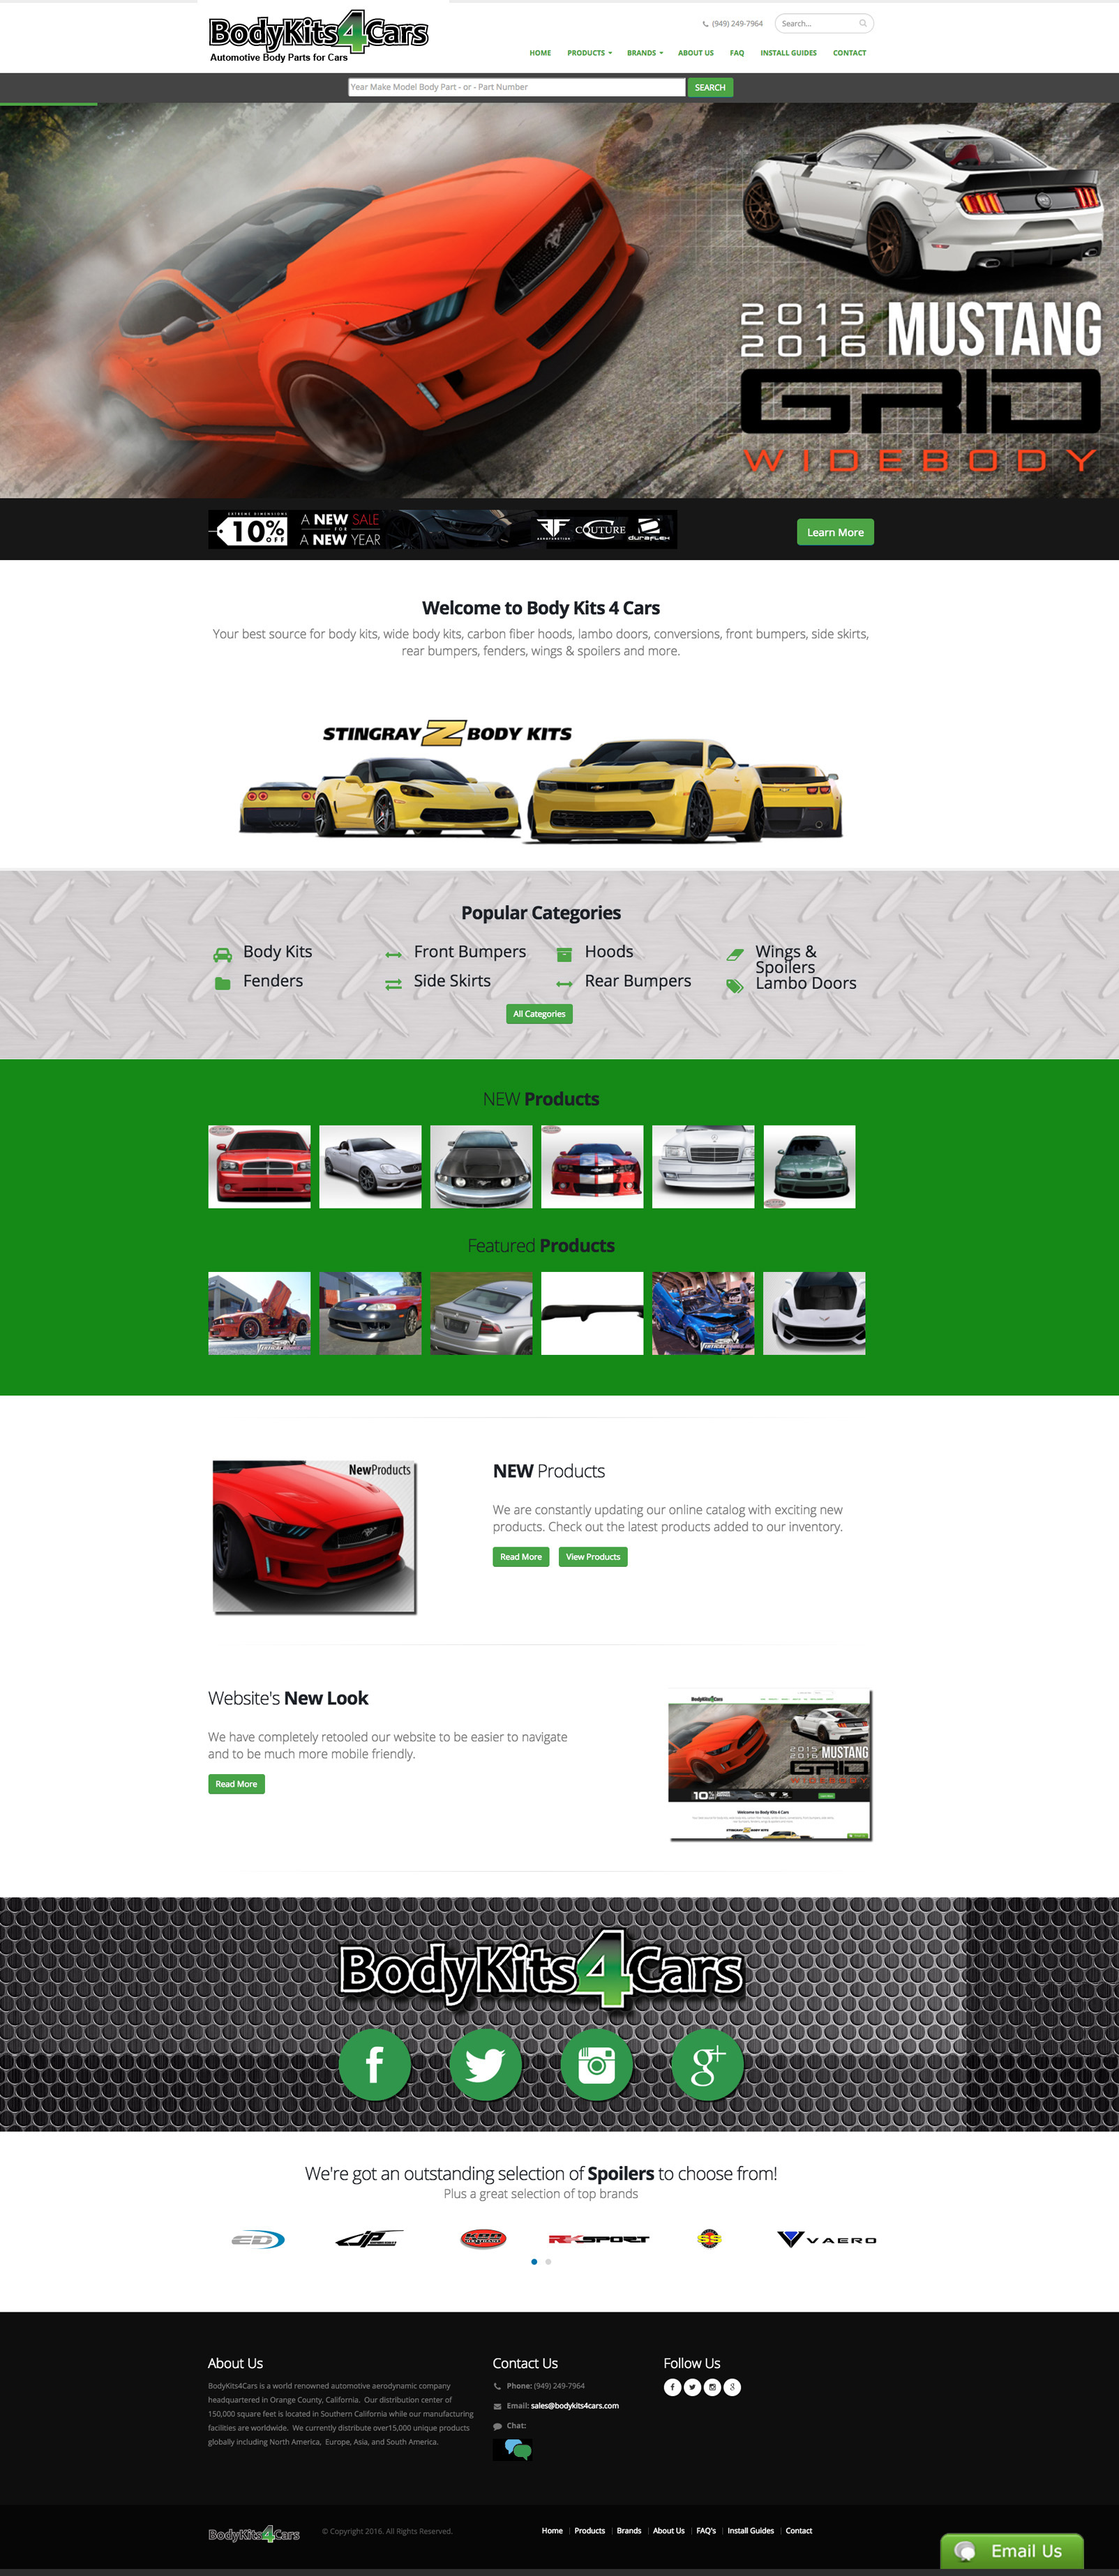 BodyKits 4 Cars home page